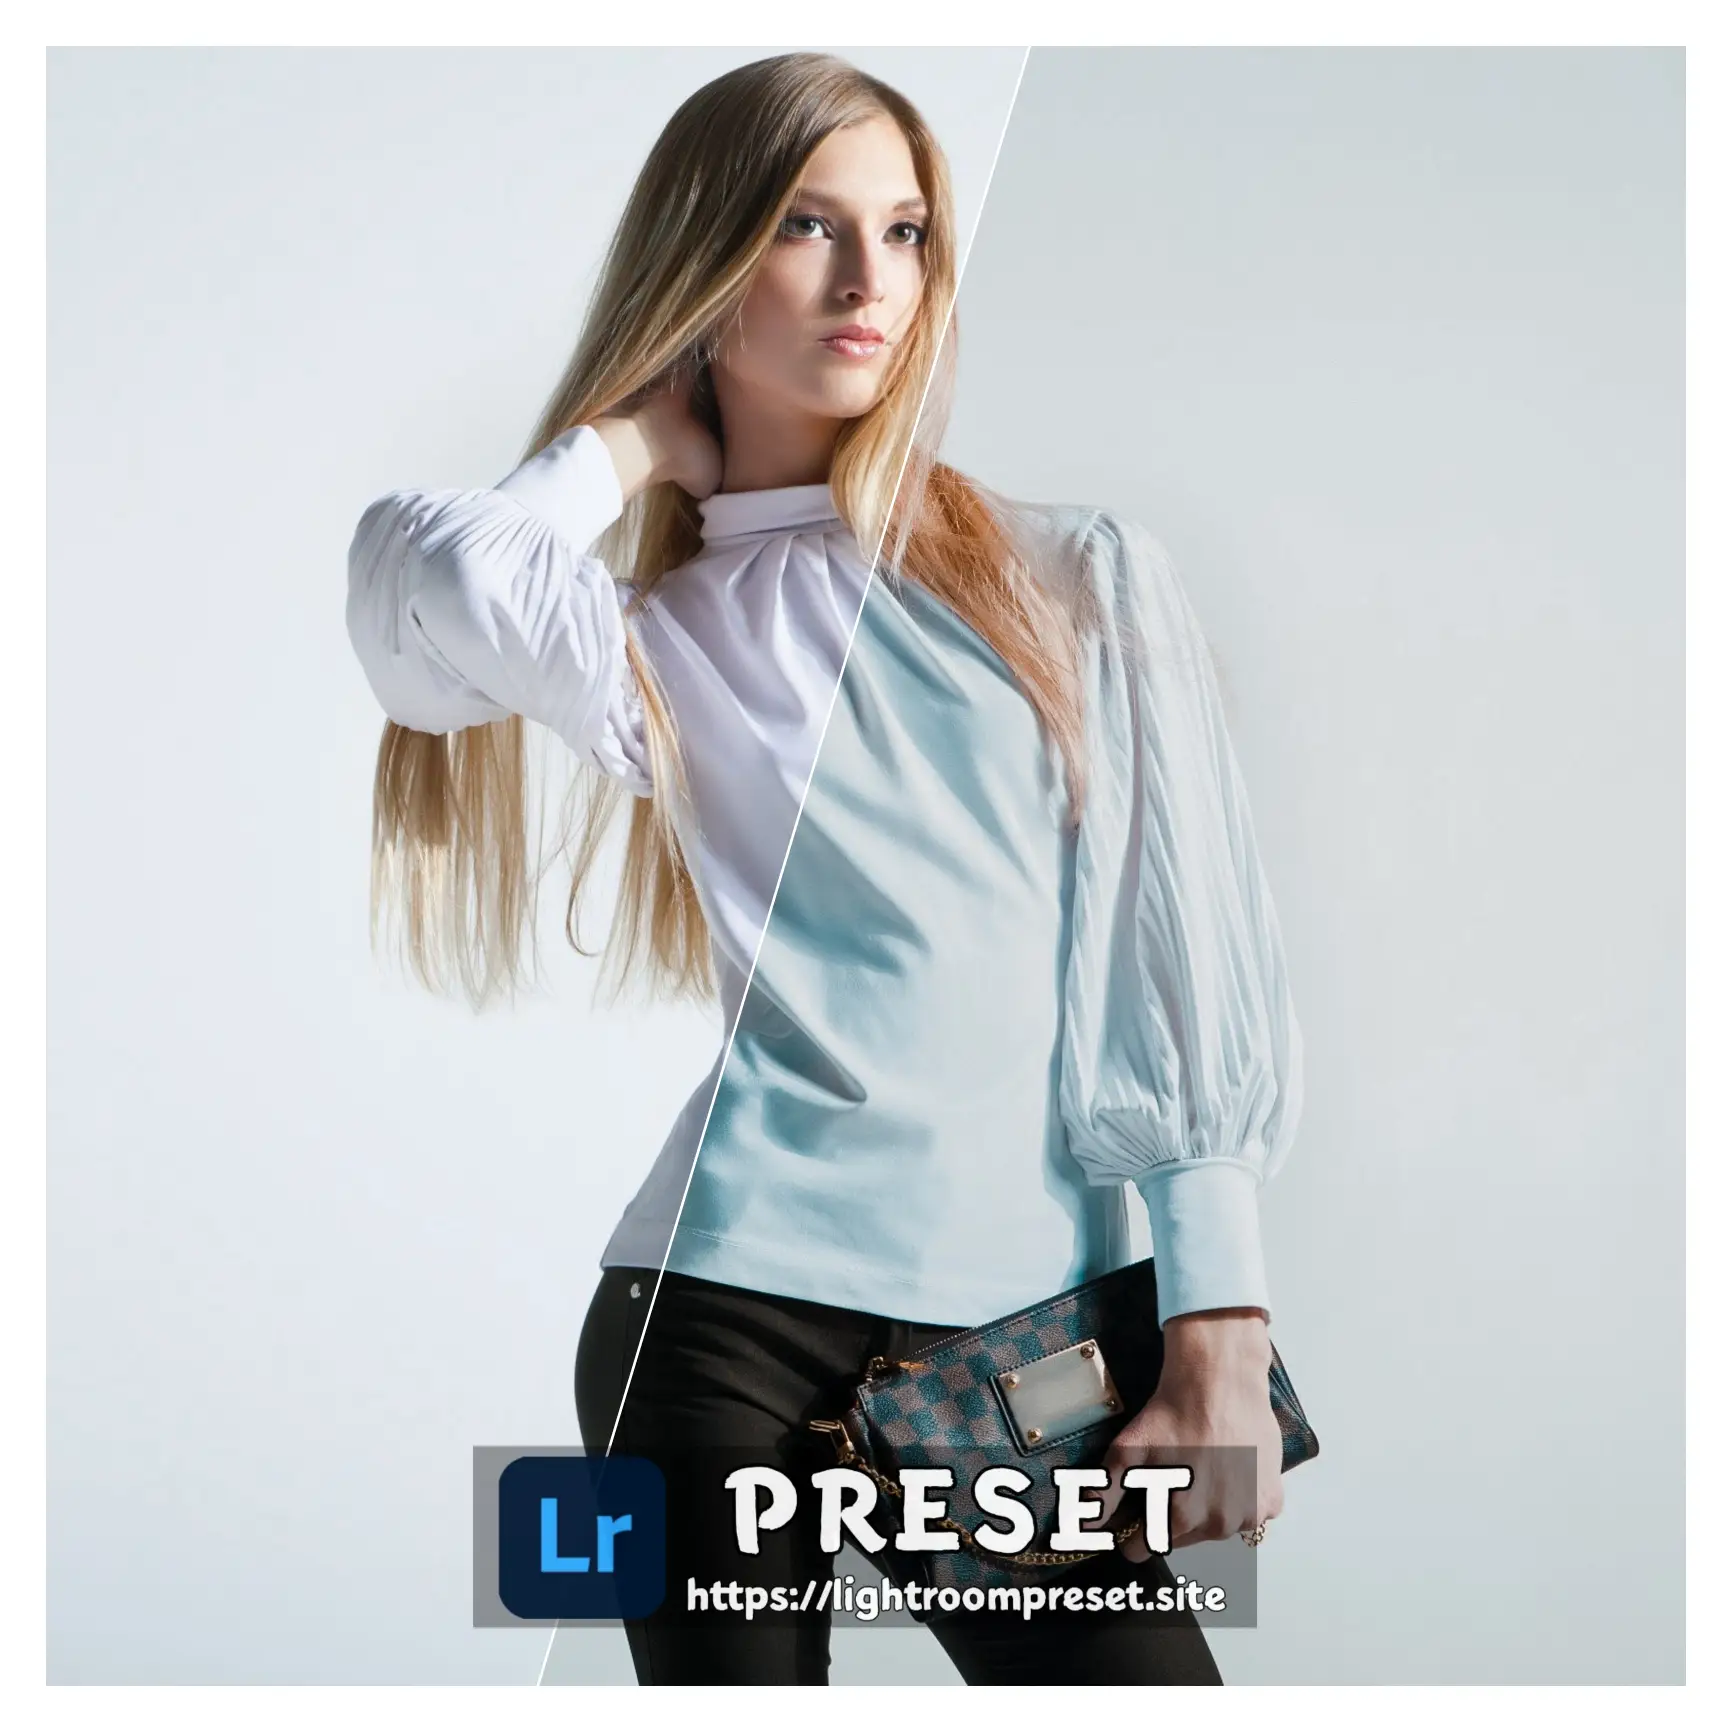 You are currently viewing Preset free download lightroom